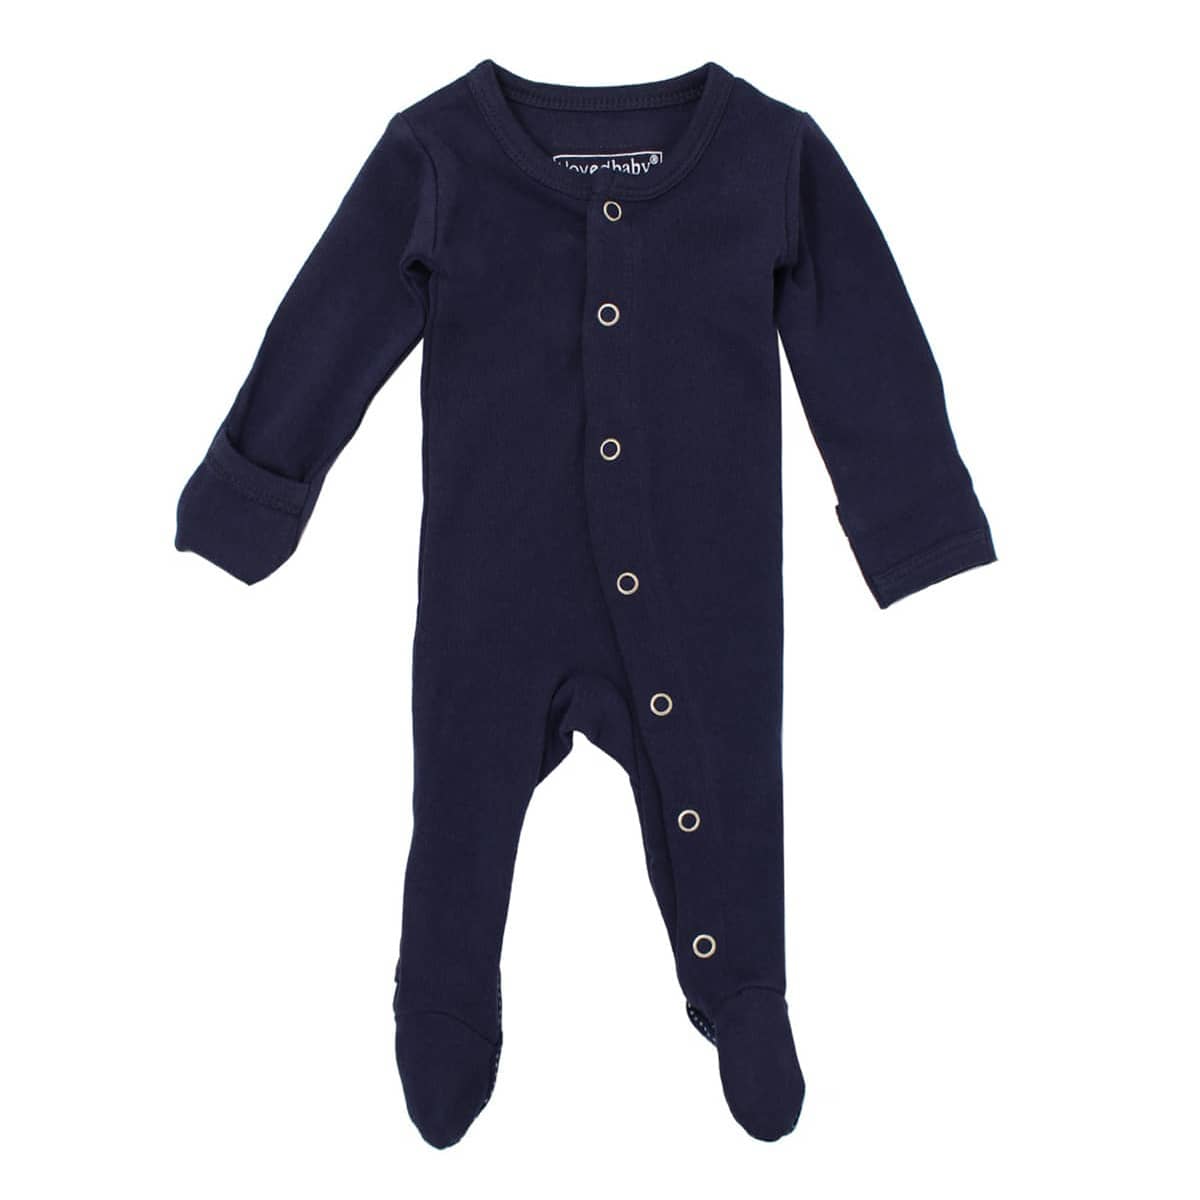 L'ovedbaby Organic Gl'oved Footed Overall - Navy